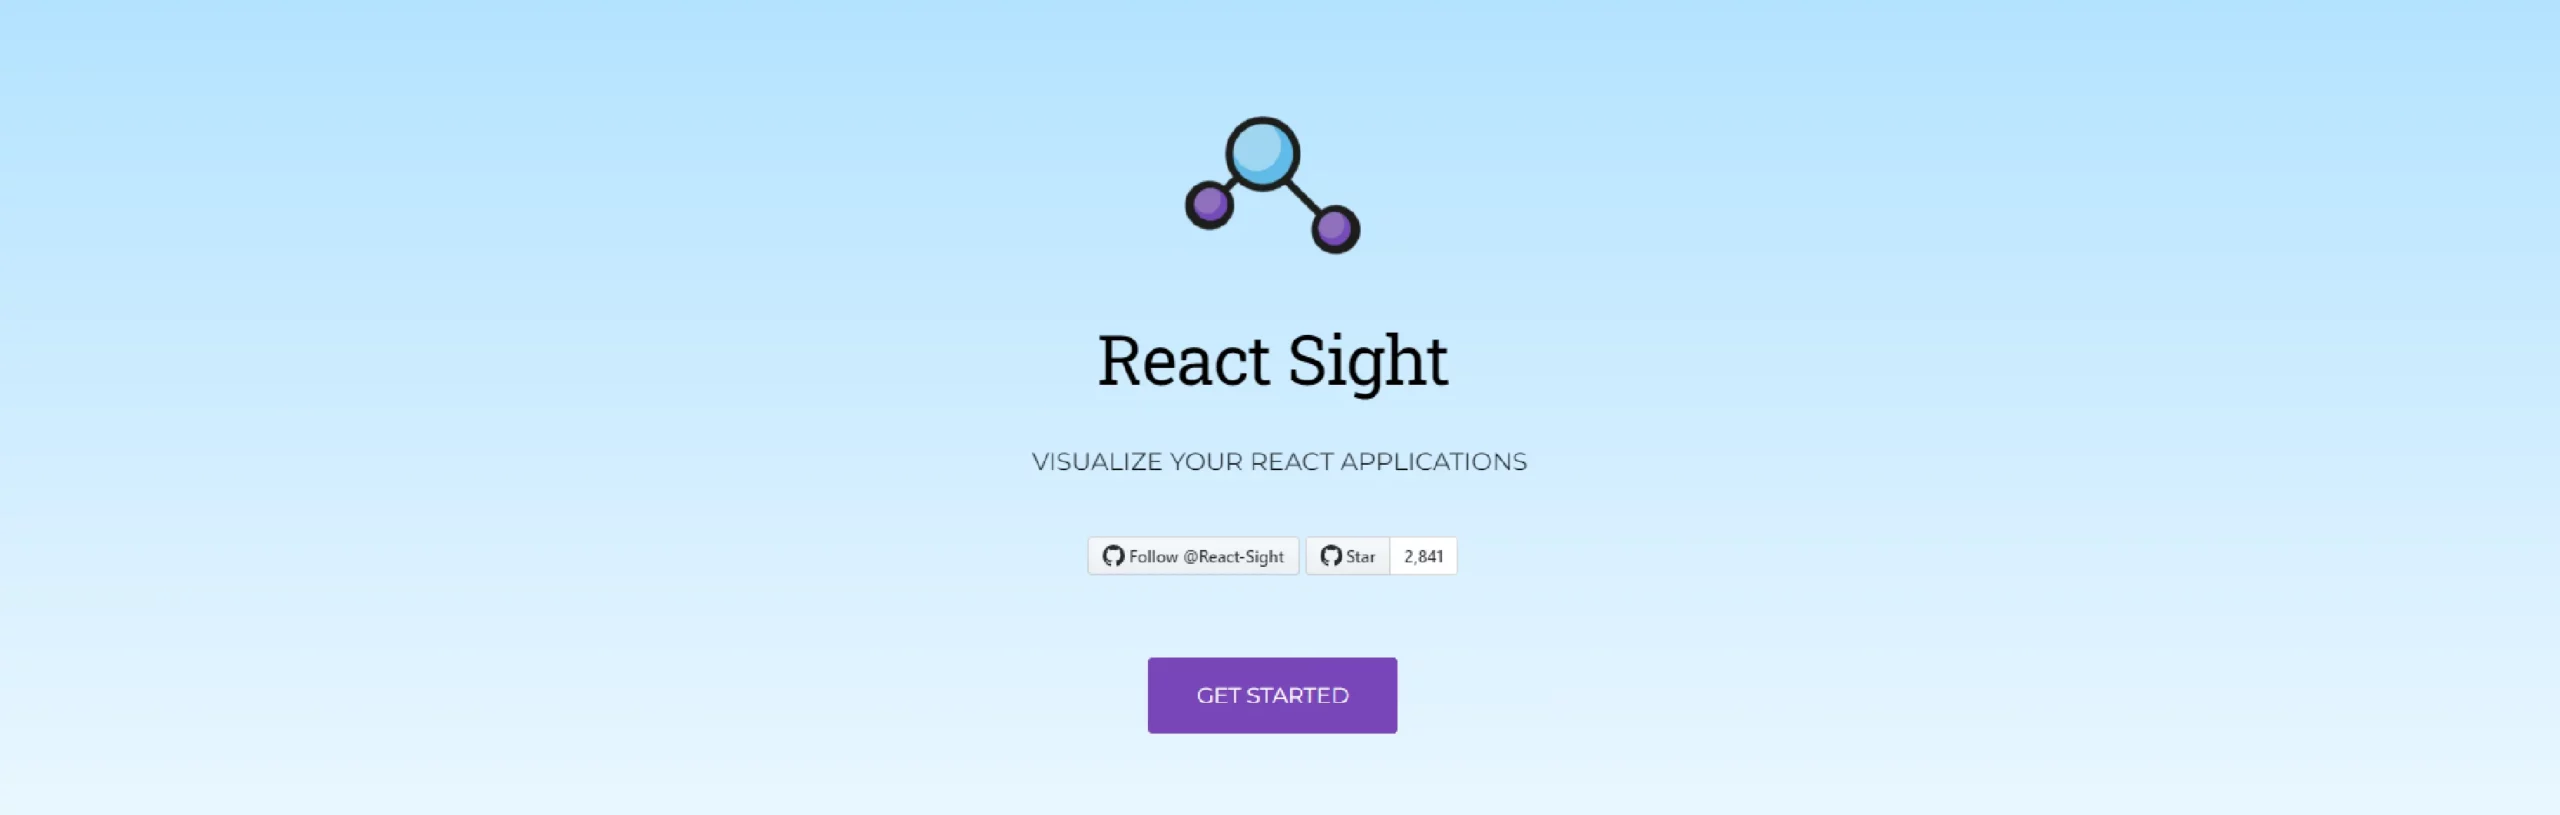 React Sight: A Visualization Tool for React Applications